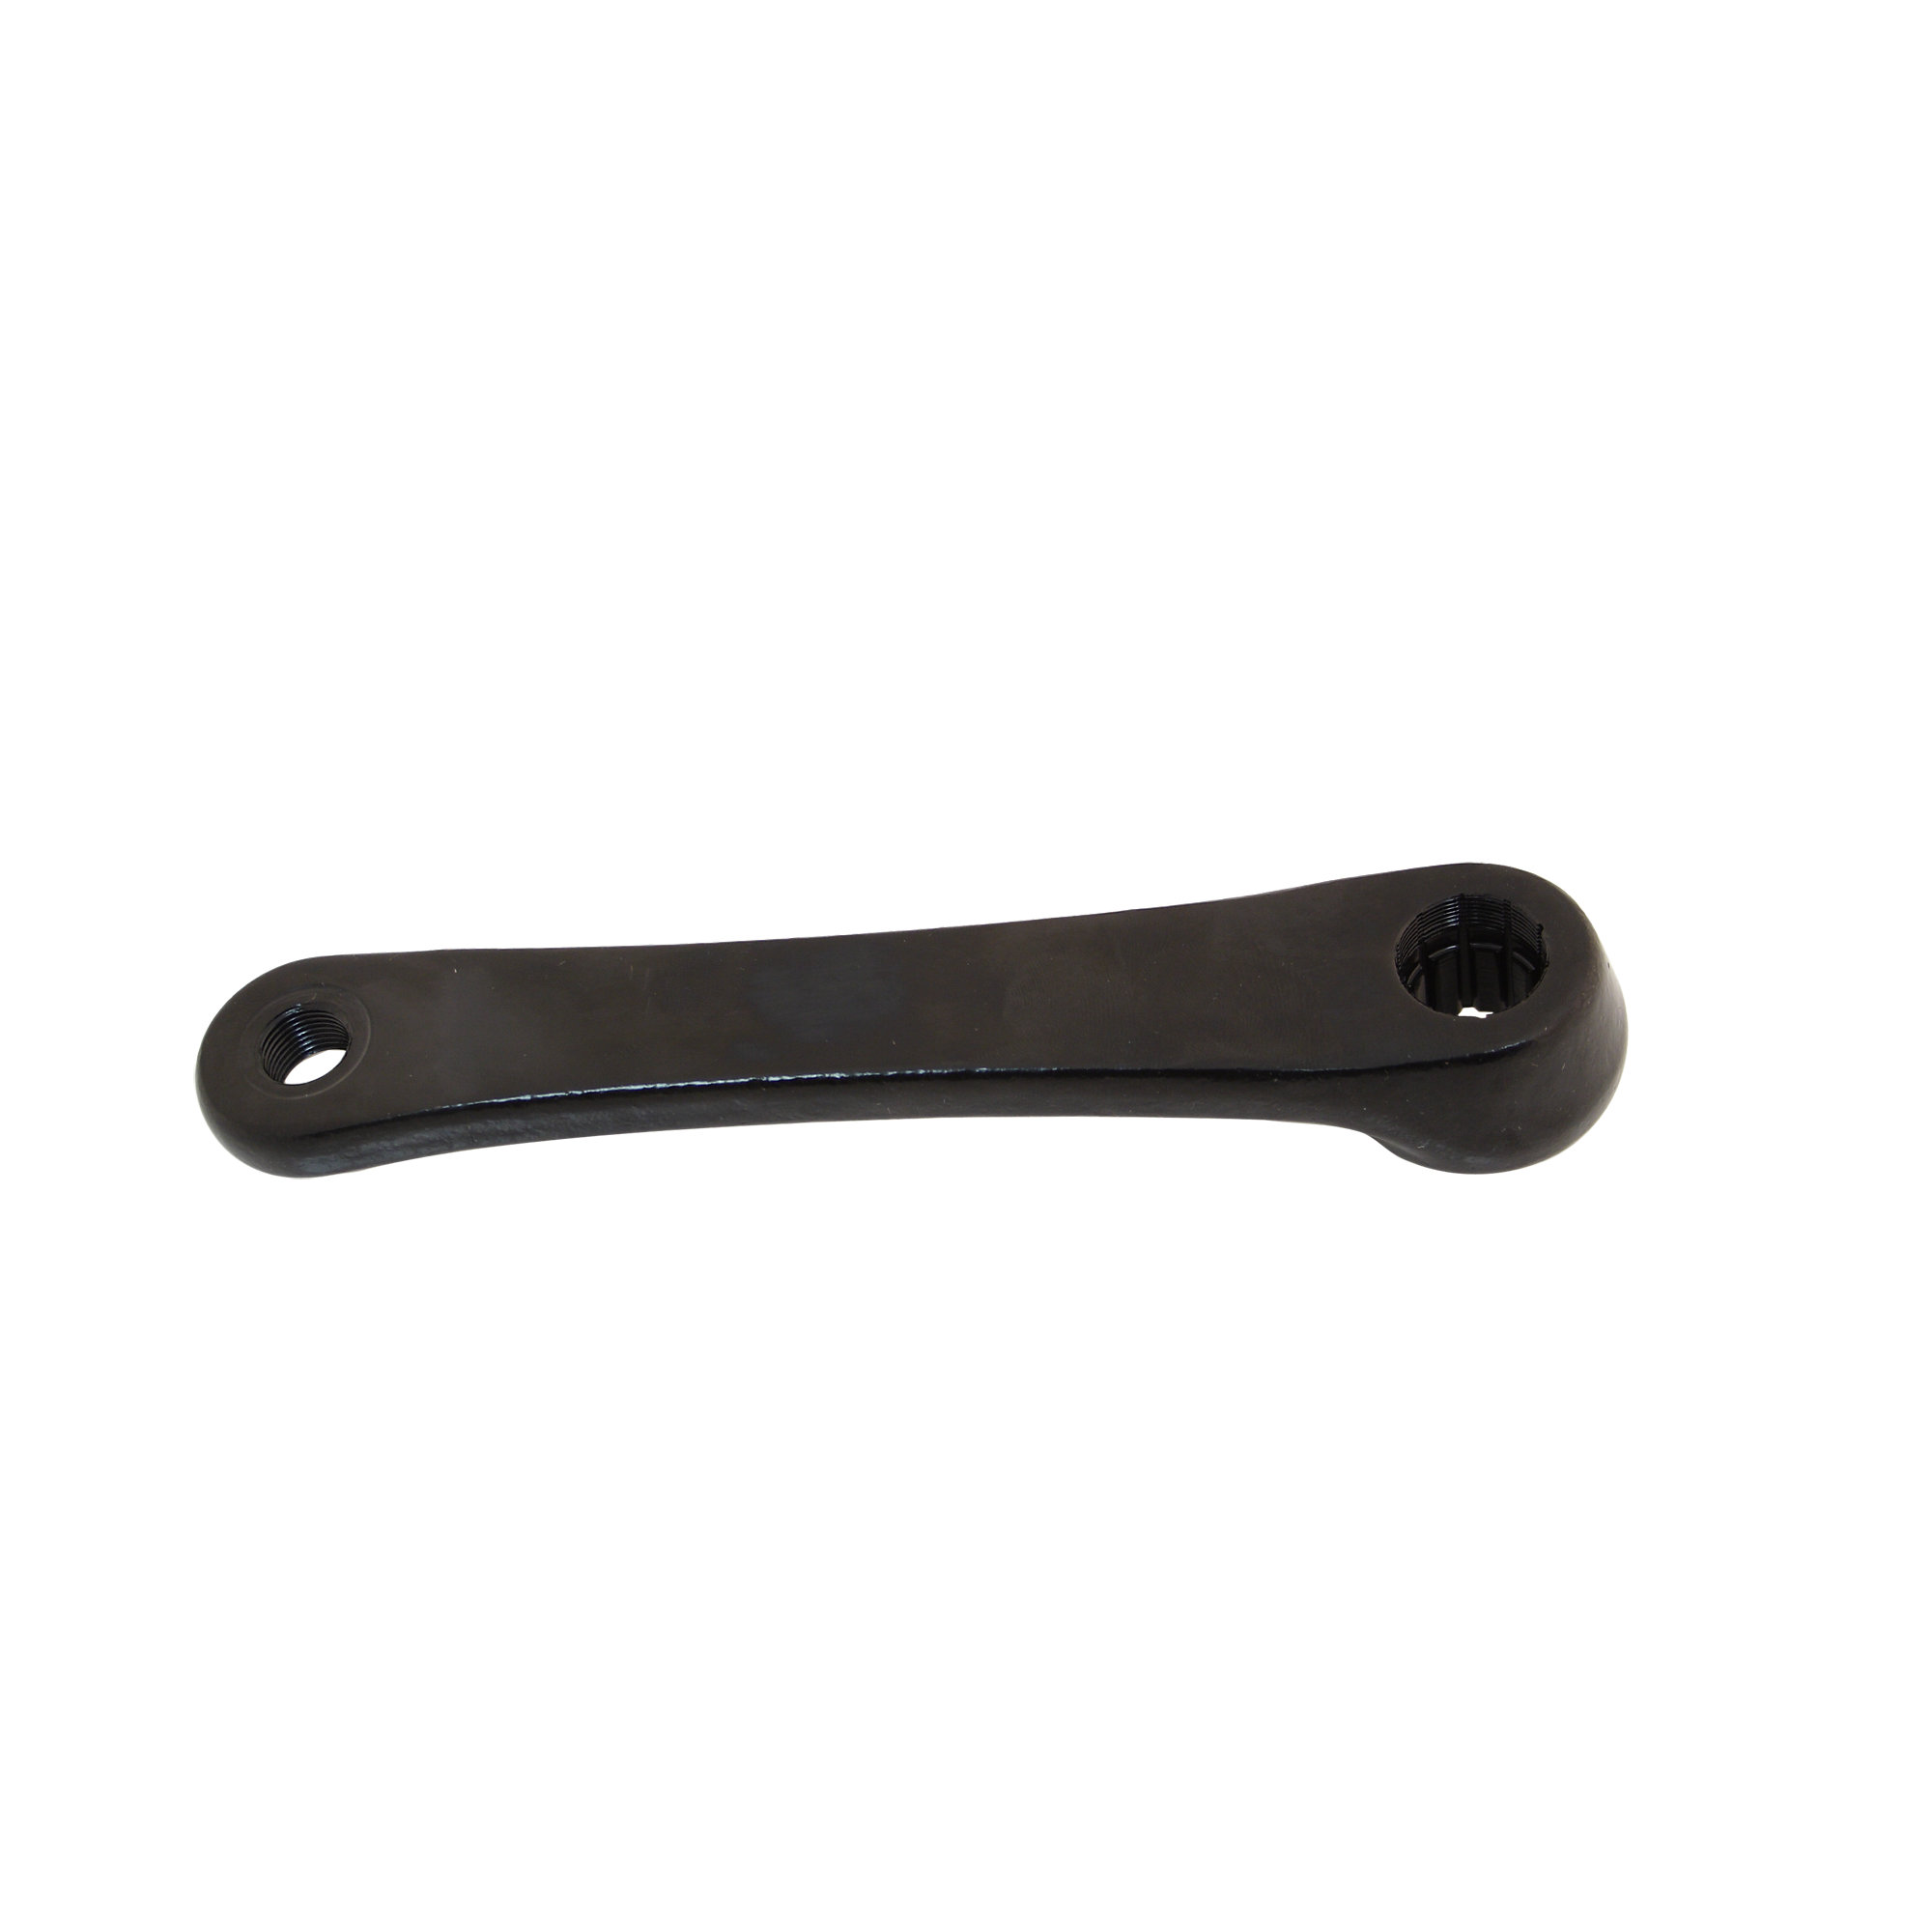 Left Crank Arm, ISIS, for 1/8", Schwinn AC and IC Pro20